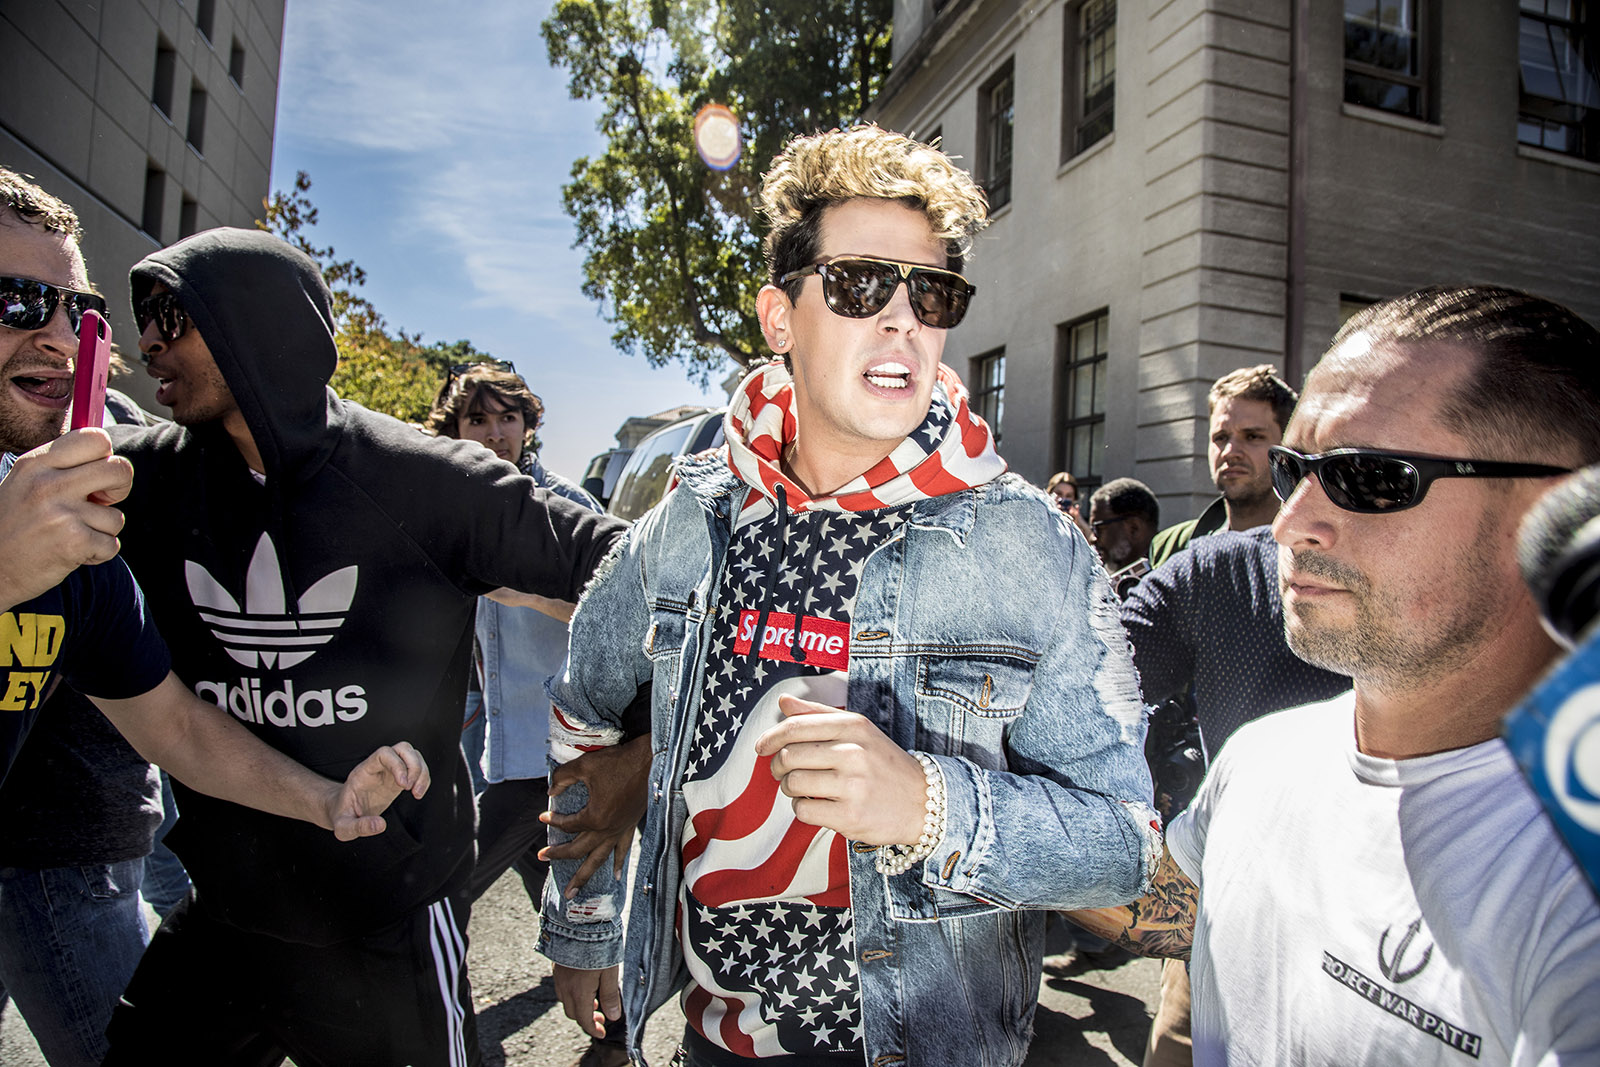 Milo Yiannopoulos leaving Sproul Plaza at the University of California, Berkeley, where he spoke briefly with a small crowd after the cancellation of ‘Free Speech Week,’ September 2017